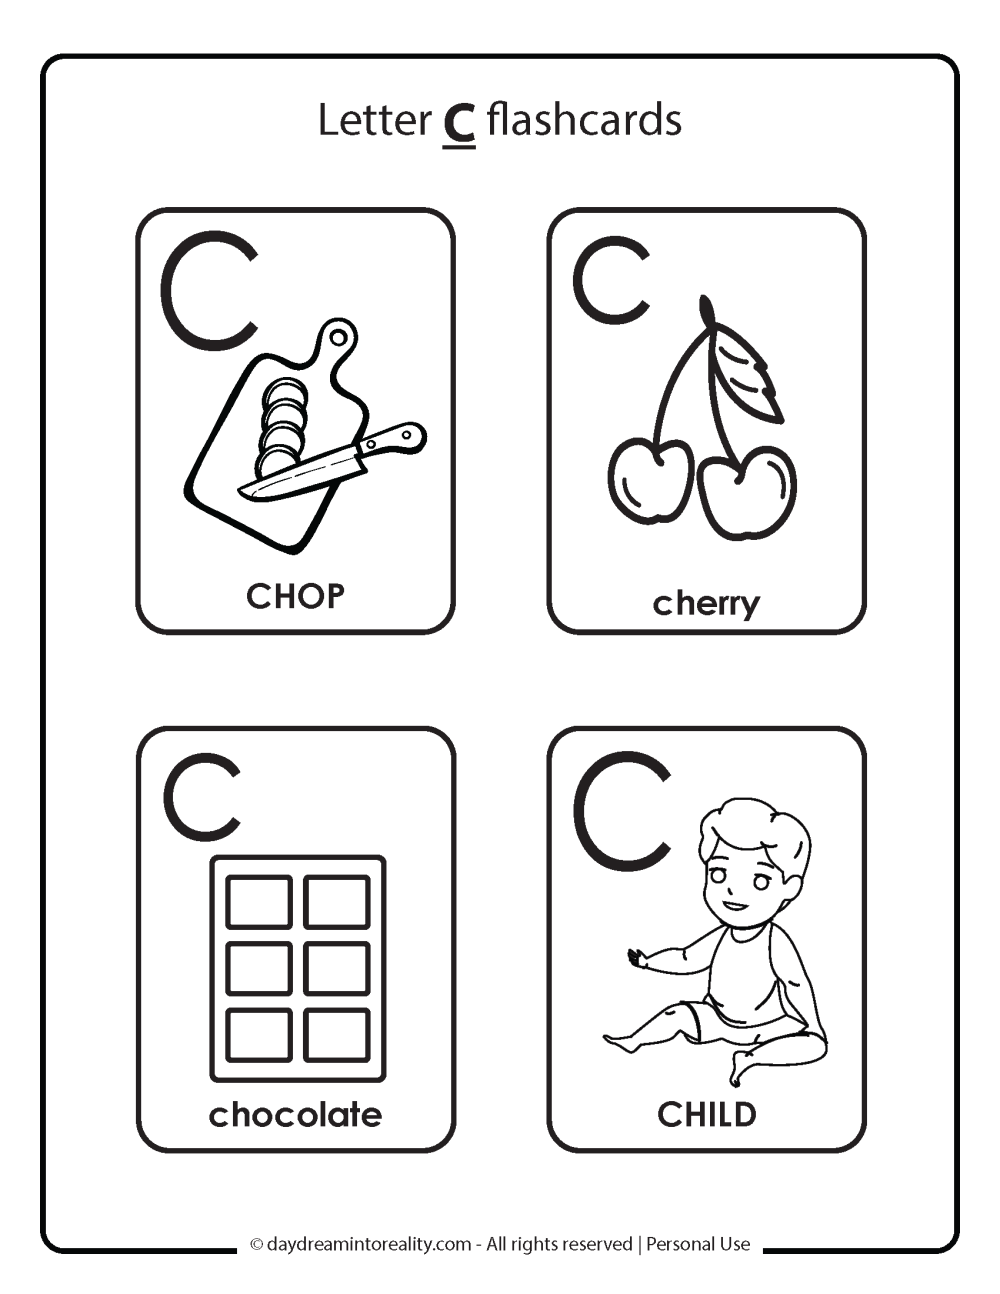 Letter C flashcards free printable